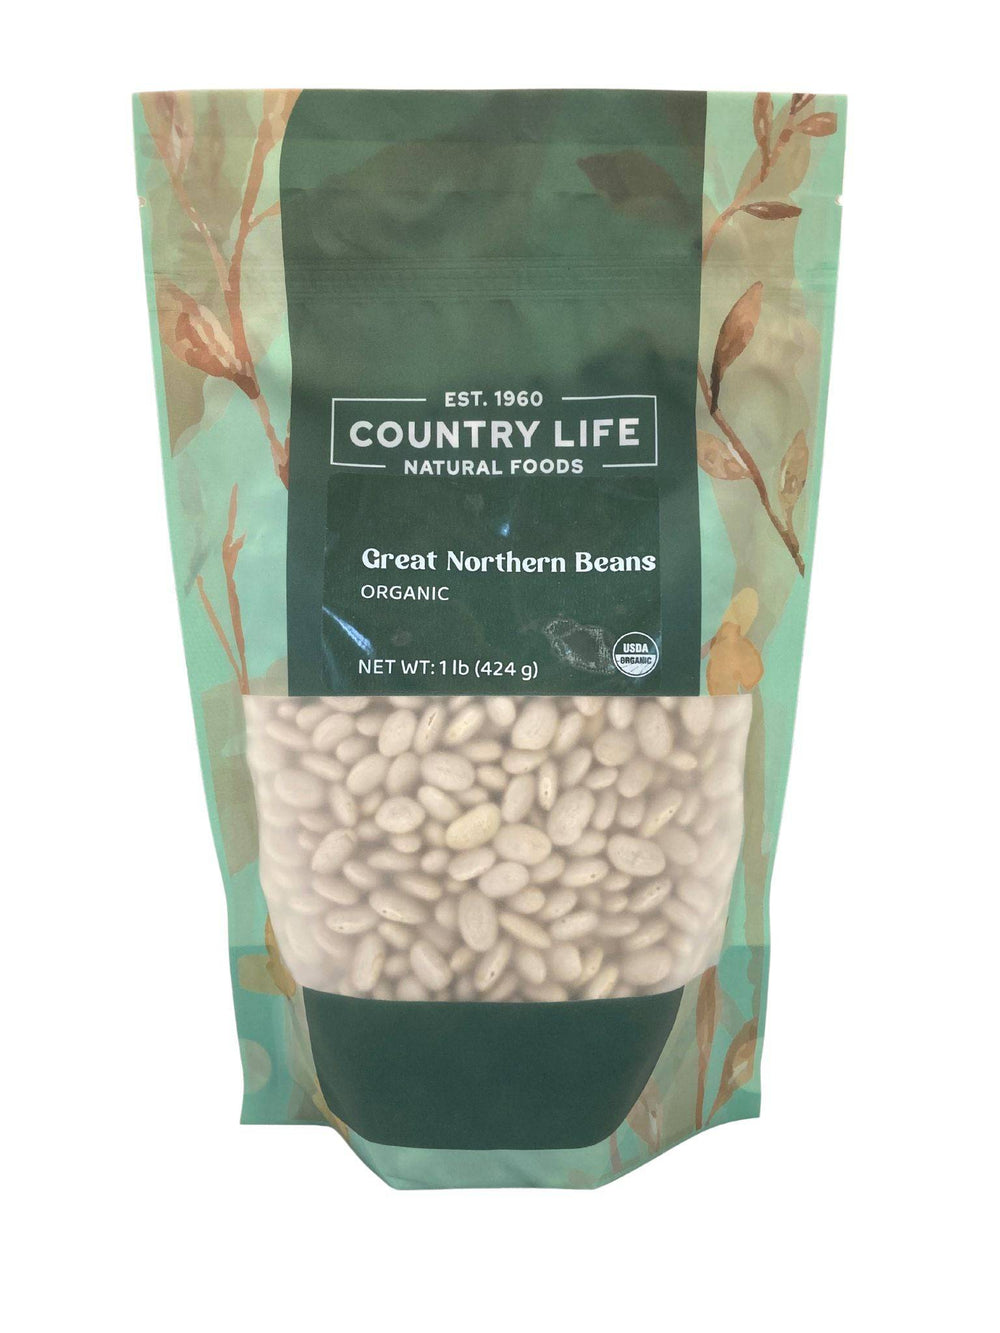 Organic Great Northern Beans - Country Life Natural Foods